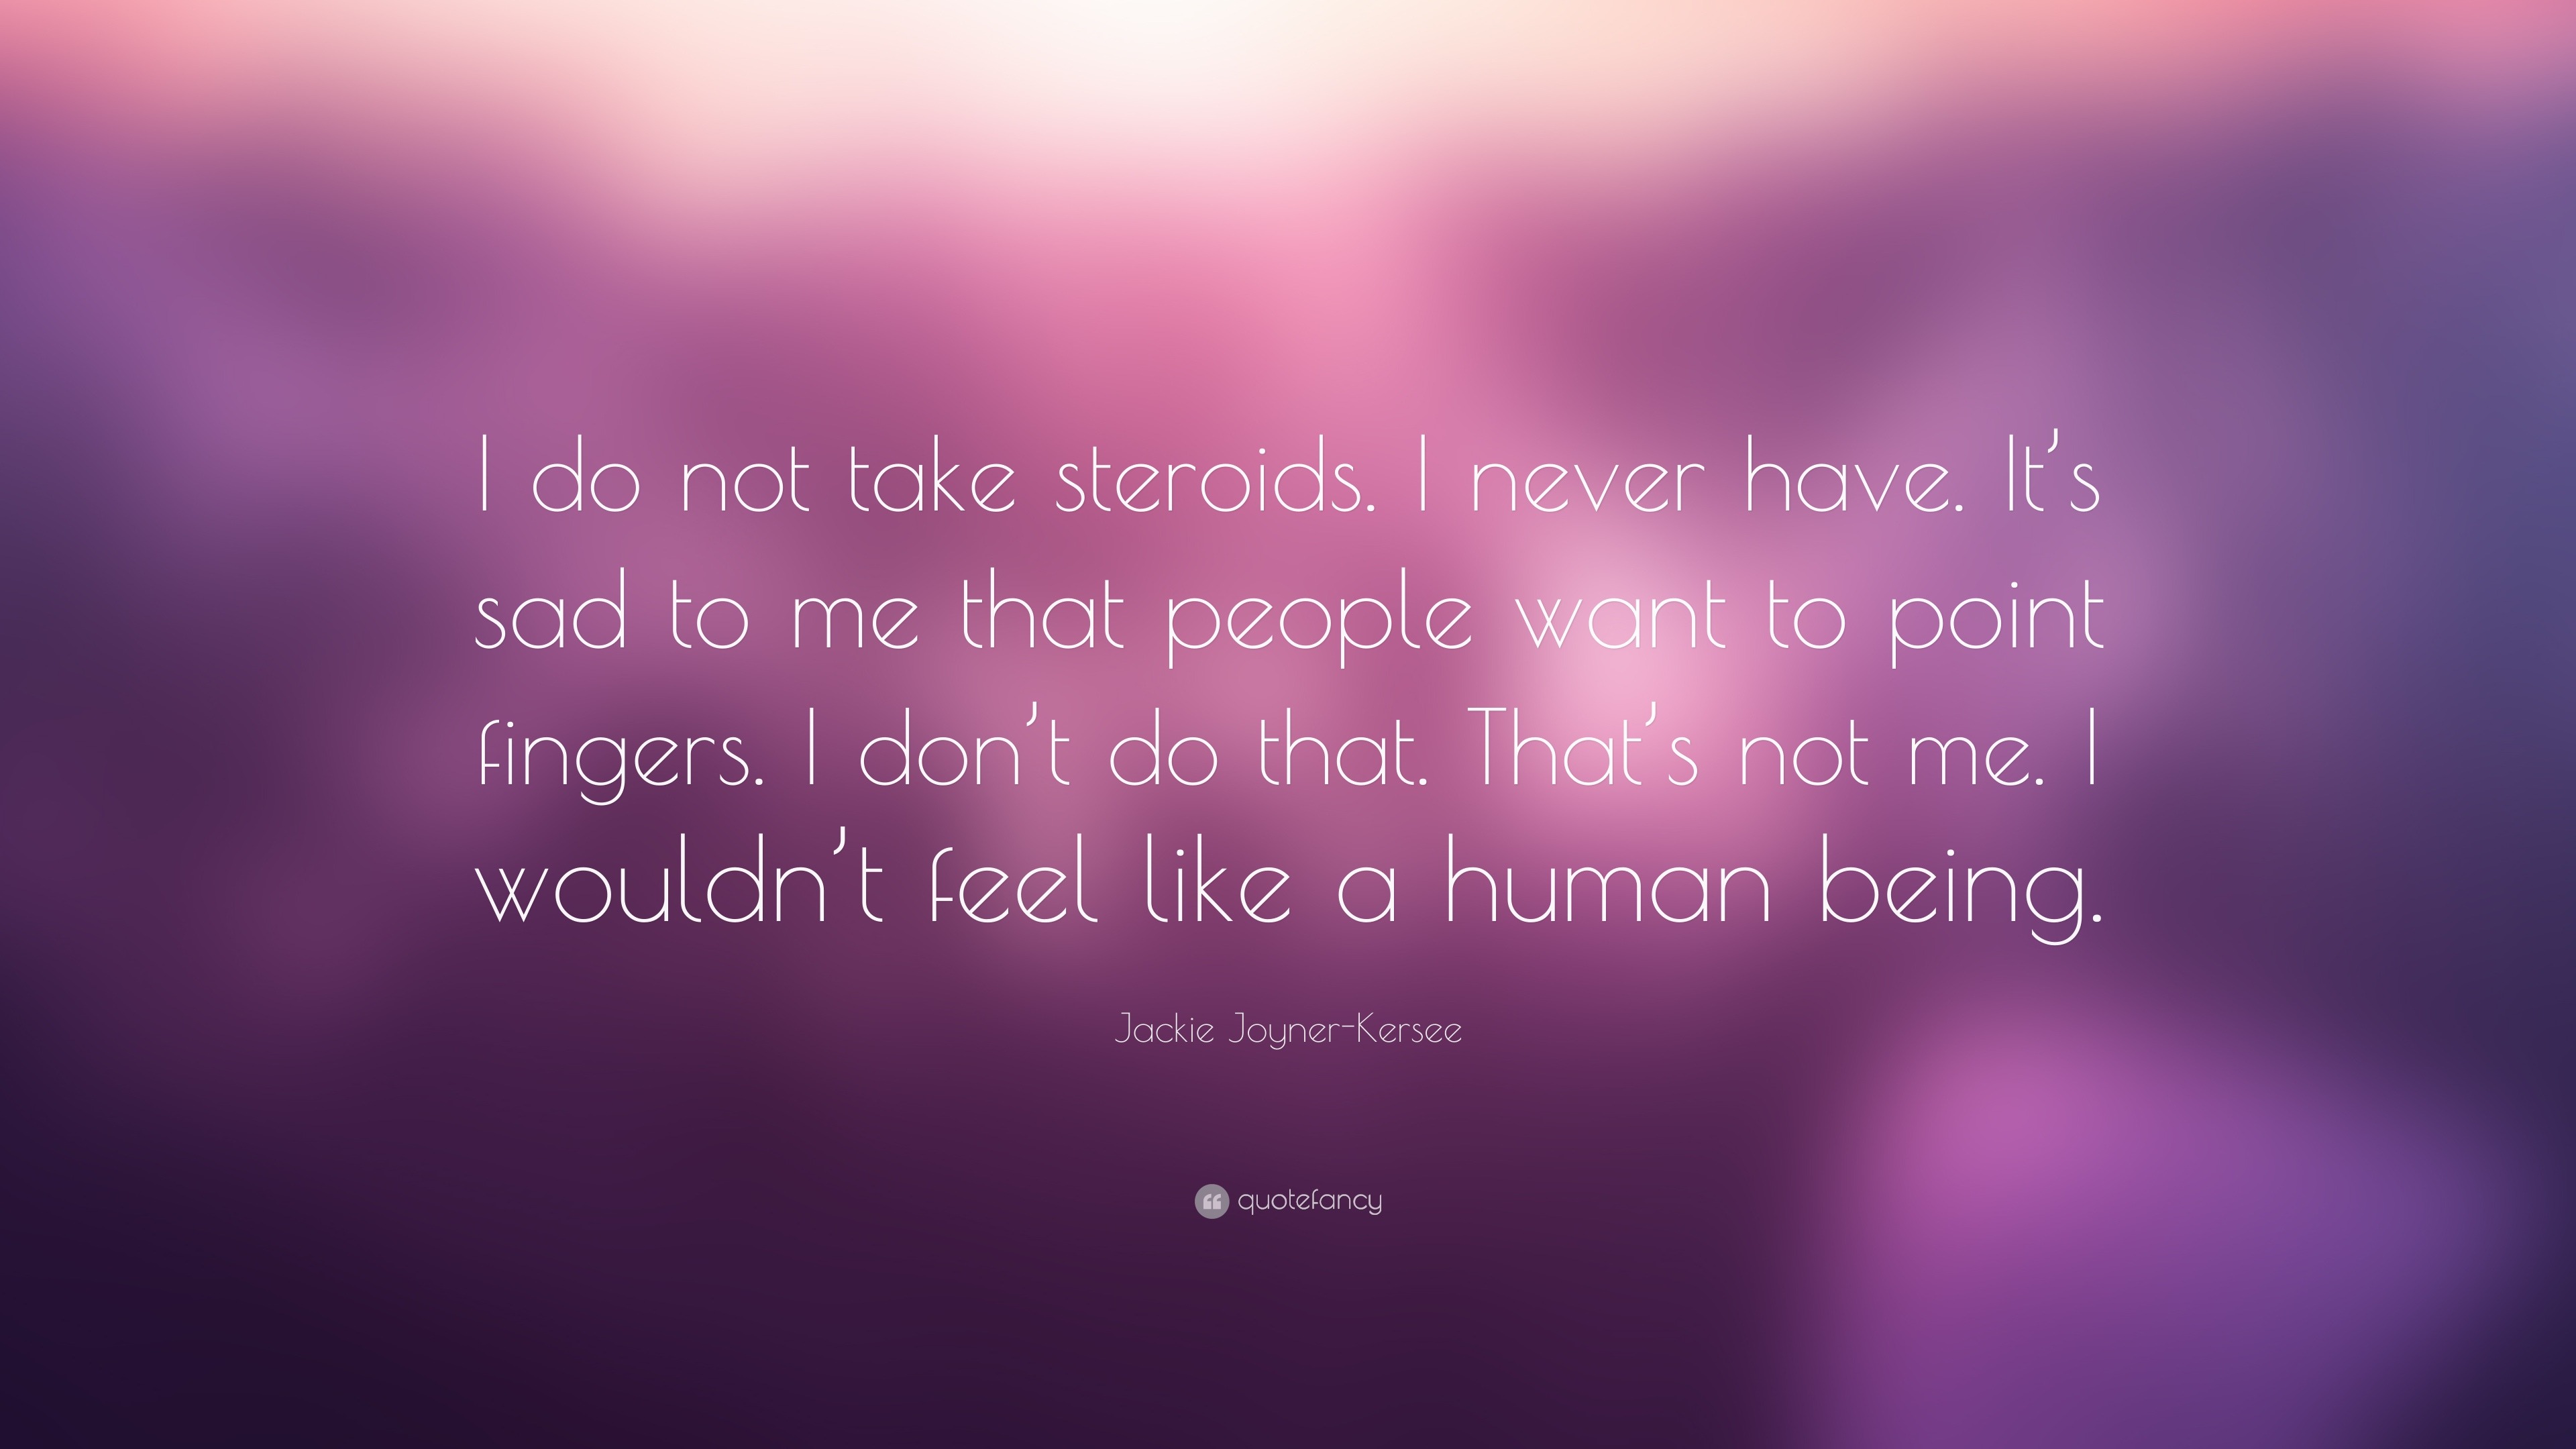 Jackie Joyner-Kersee Quote: “I do not take steroids. I never have. It’s ...